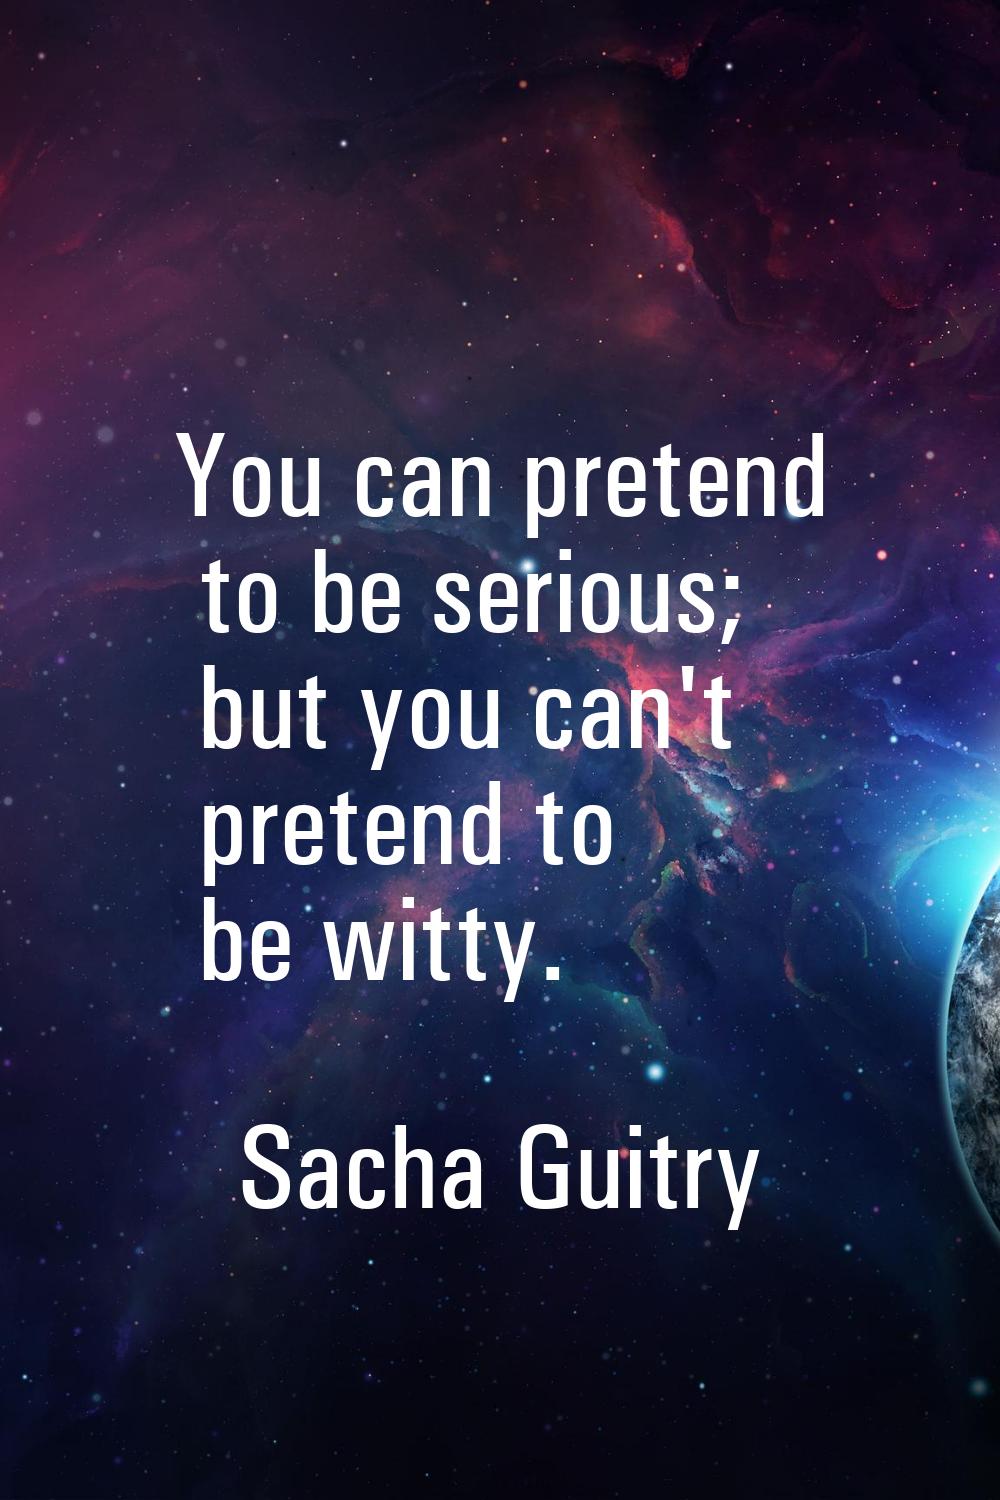 You can pretend to be serious; but you can't pretend to be witty.